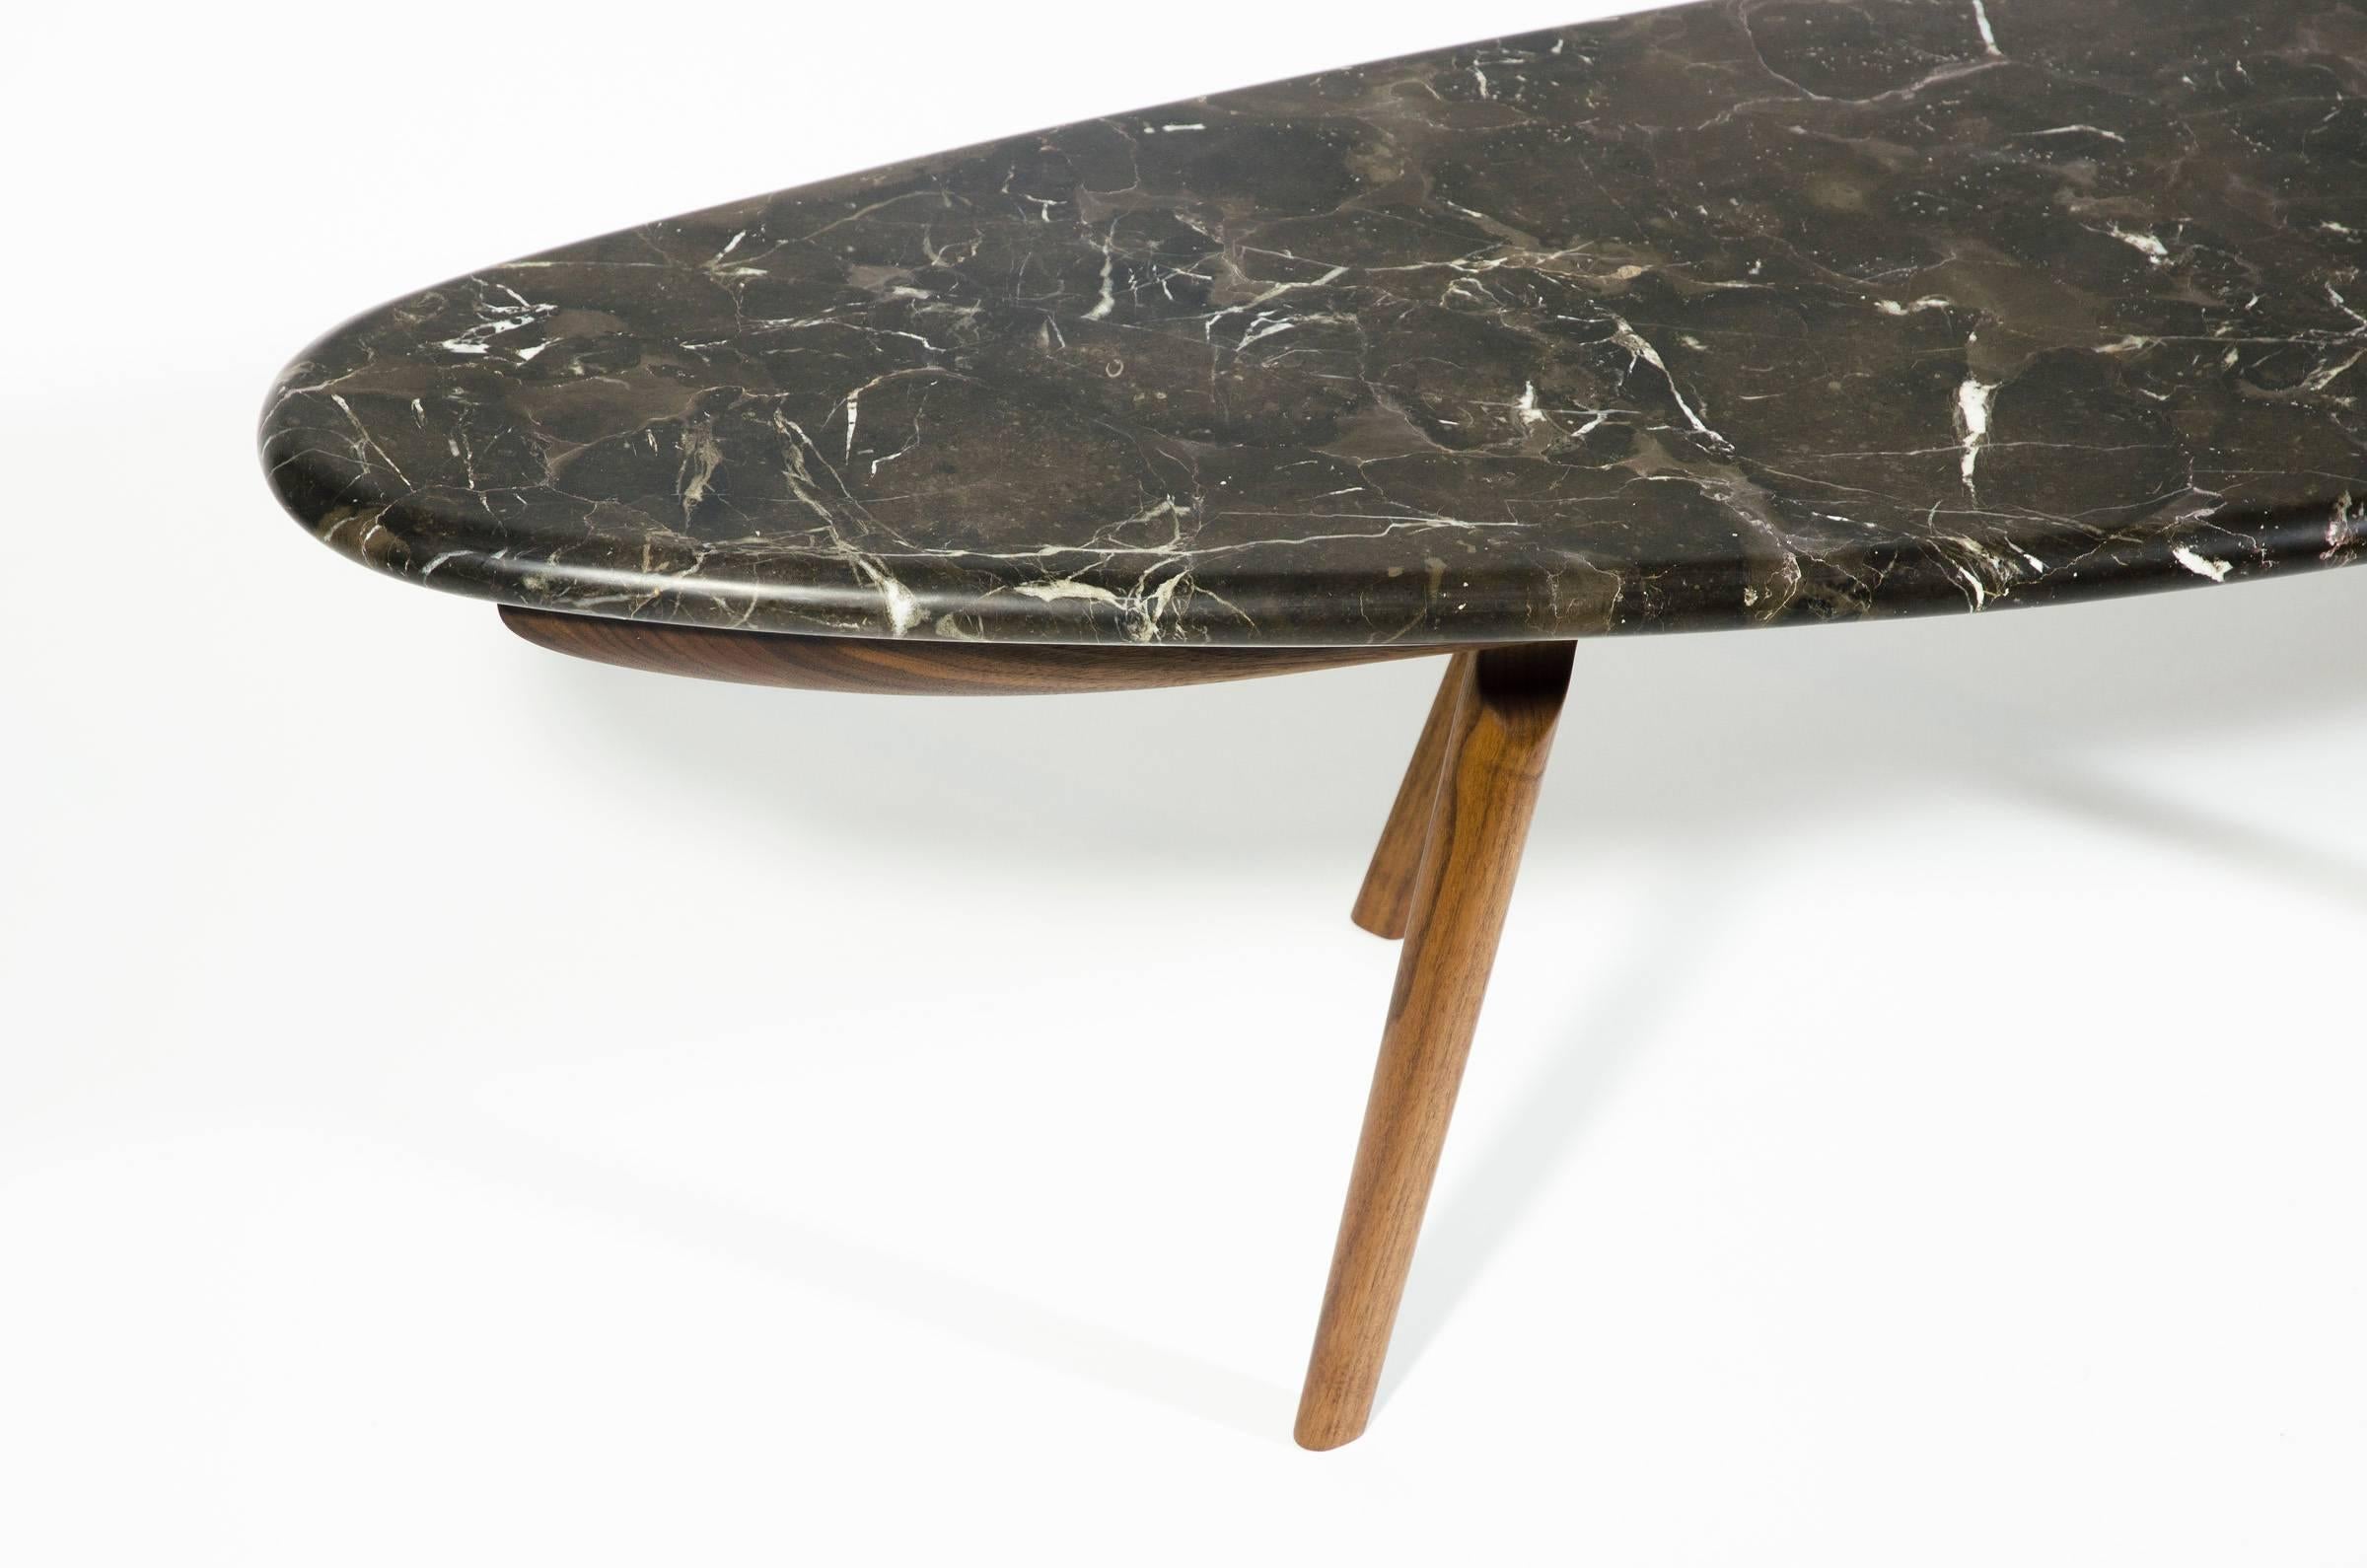 Contemporary Black Marble Stone and Walnut Wood Coffee Cocktail Table CBR Studio im Zustand „Neu“ im Angebot in Brooklyn, NY